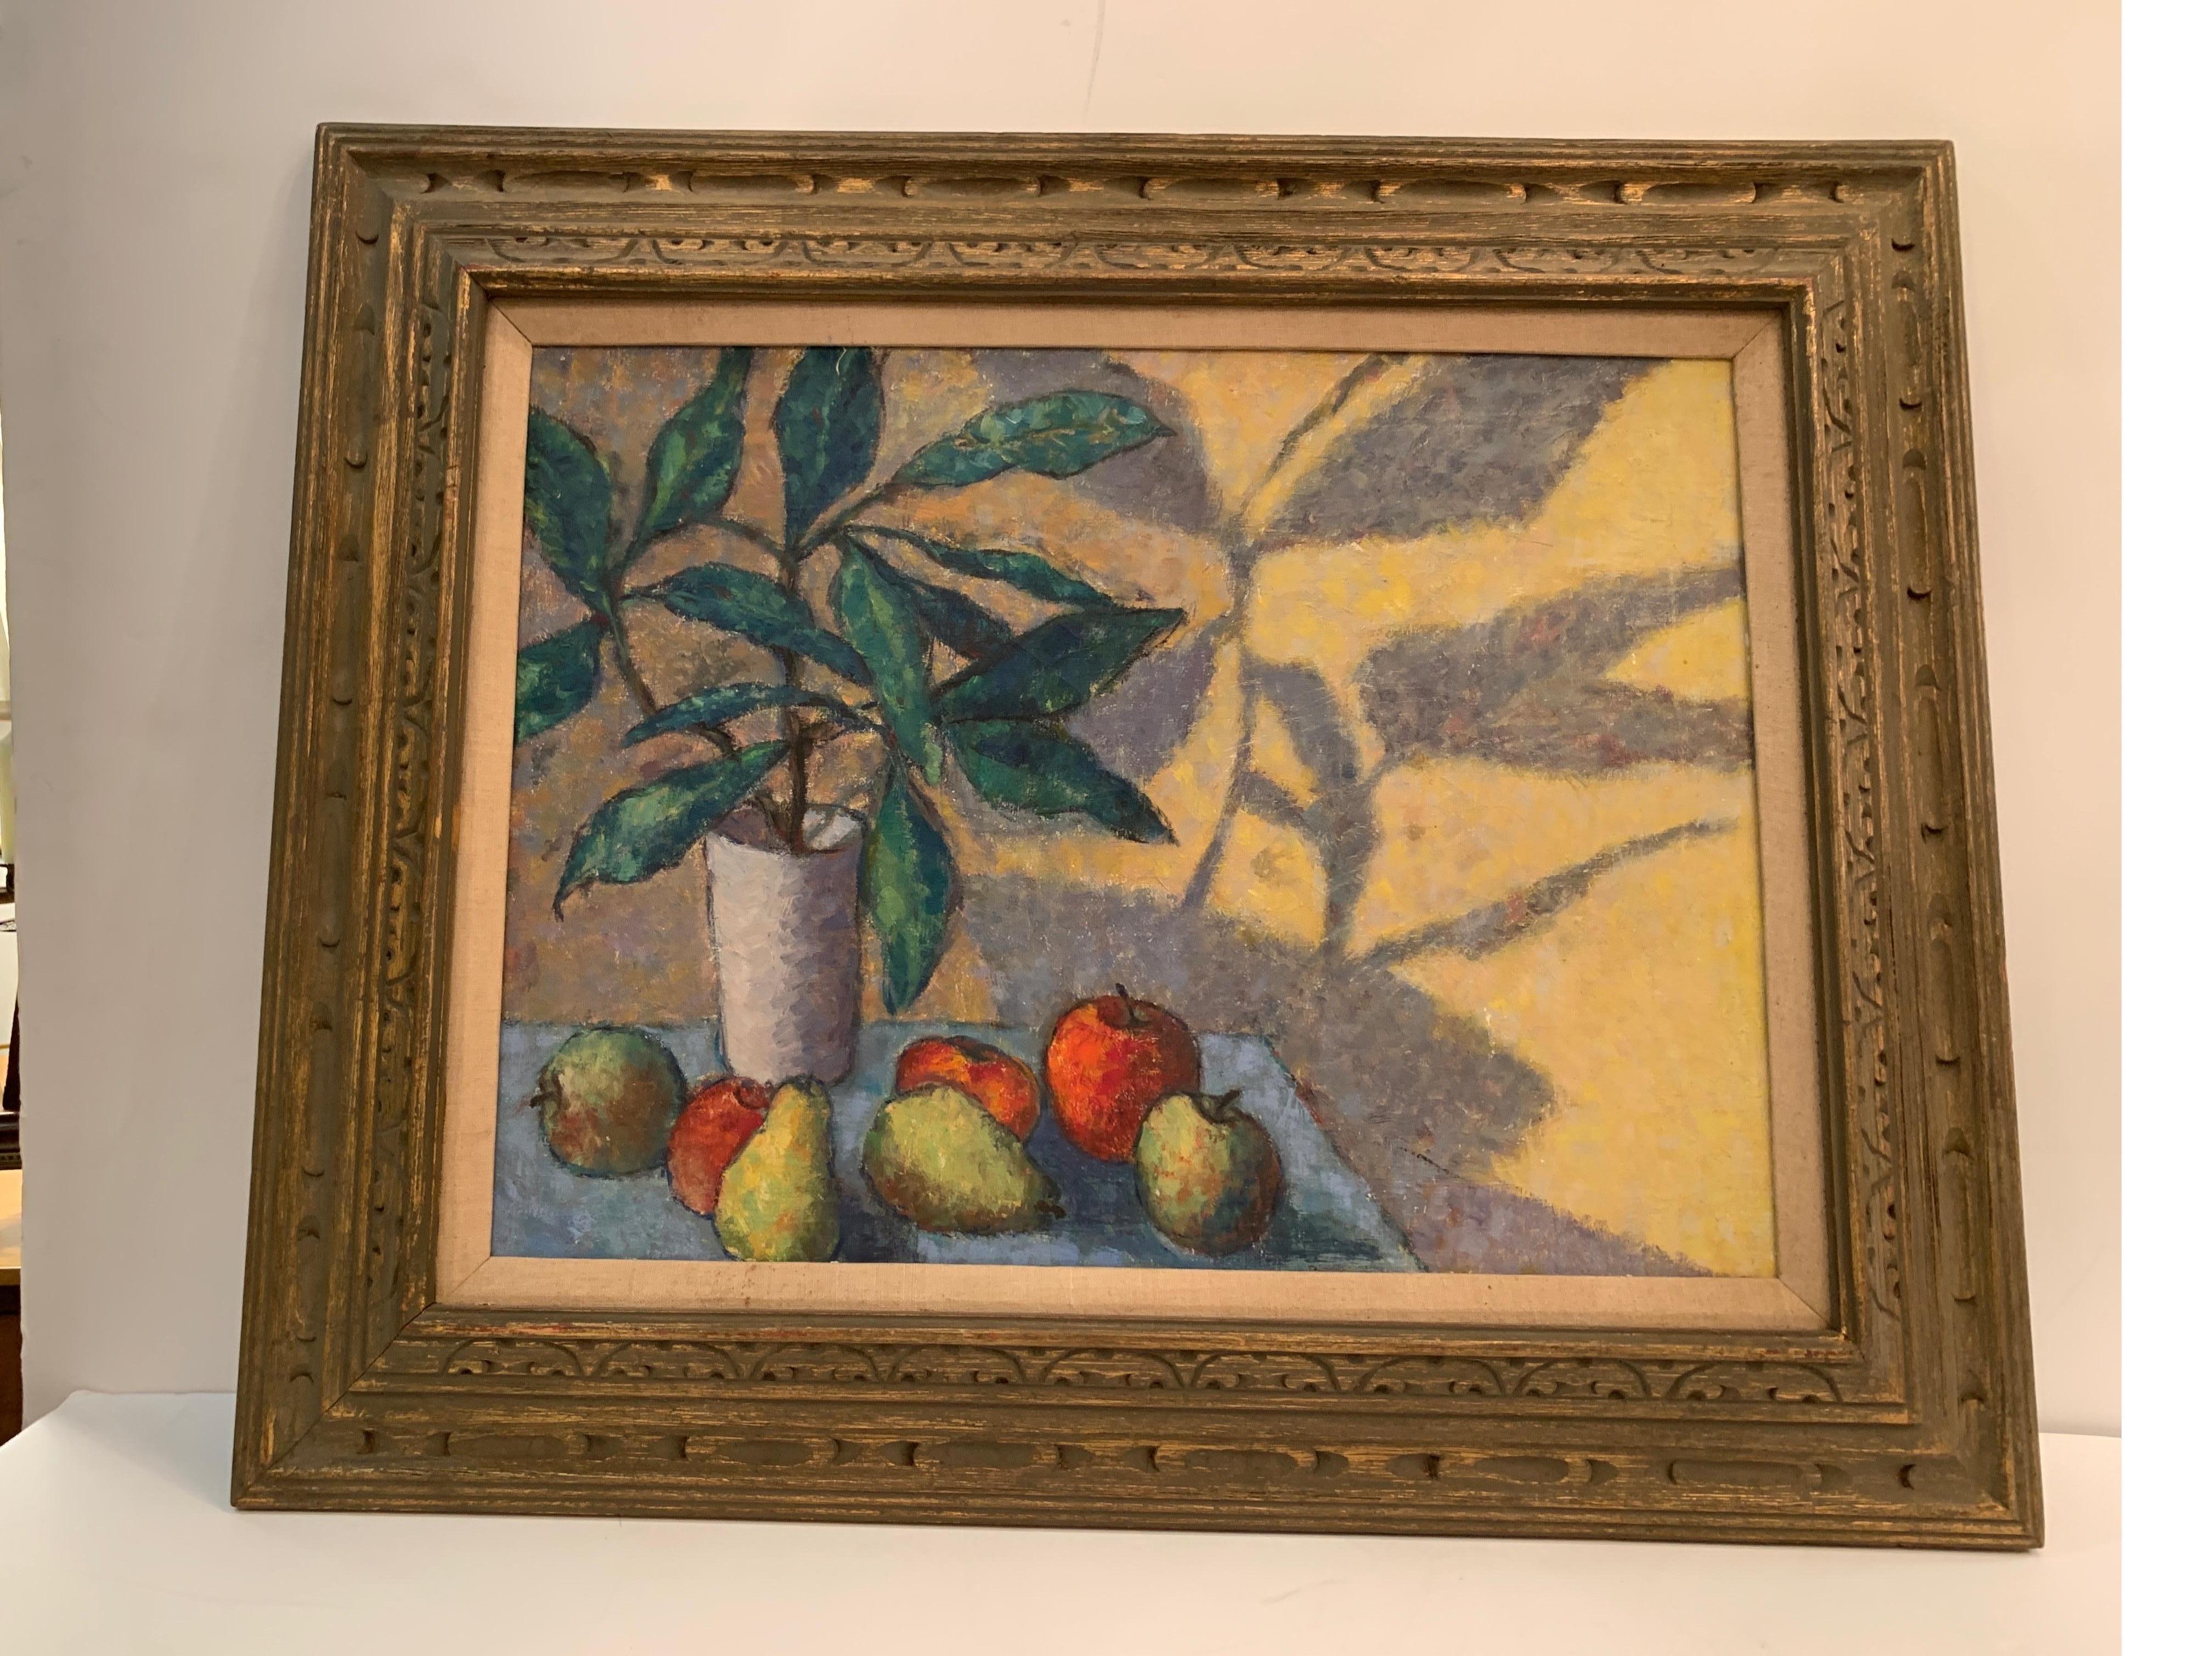 Classic impressionist modern still life oil on canvas painting with original carved wood scrubbed giltwood frame. Vibrant color pallet with a vase of citrus branches with an assortment of fruit on a yellow background.